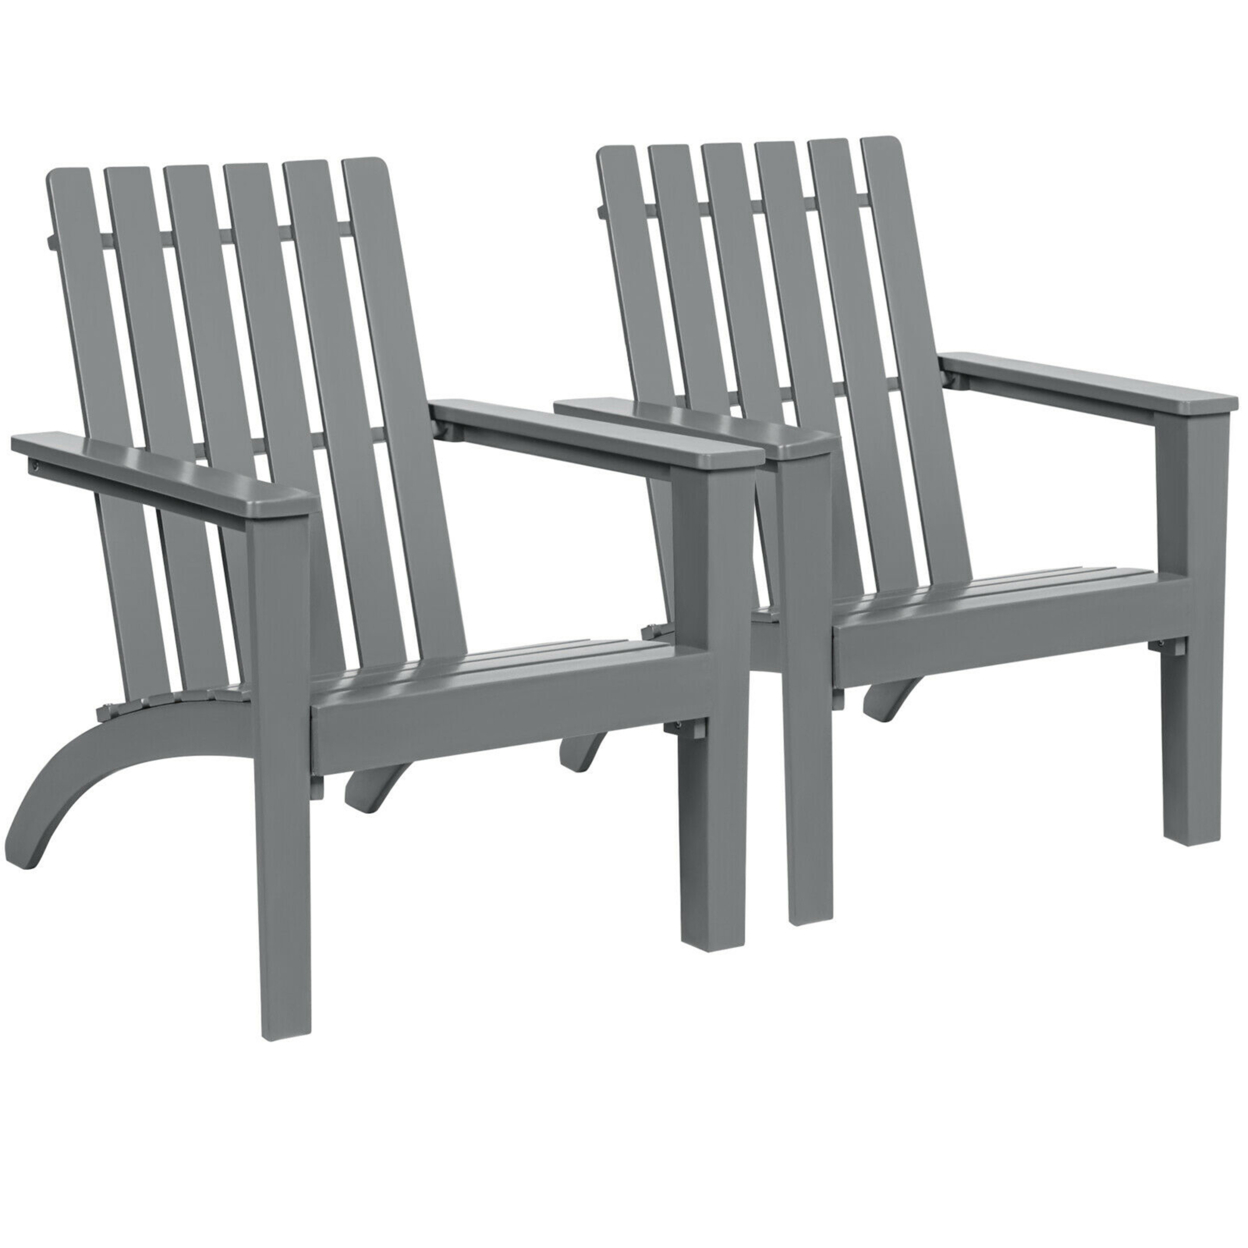 Set Of 2 Outdoor Wooden Adirondack Chair Patio Lounge Chair W/ Armrest - Grey